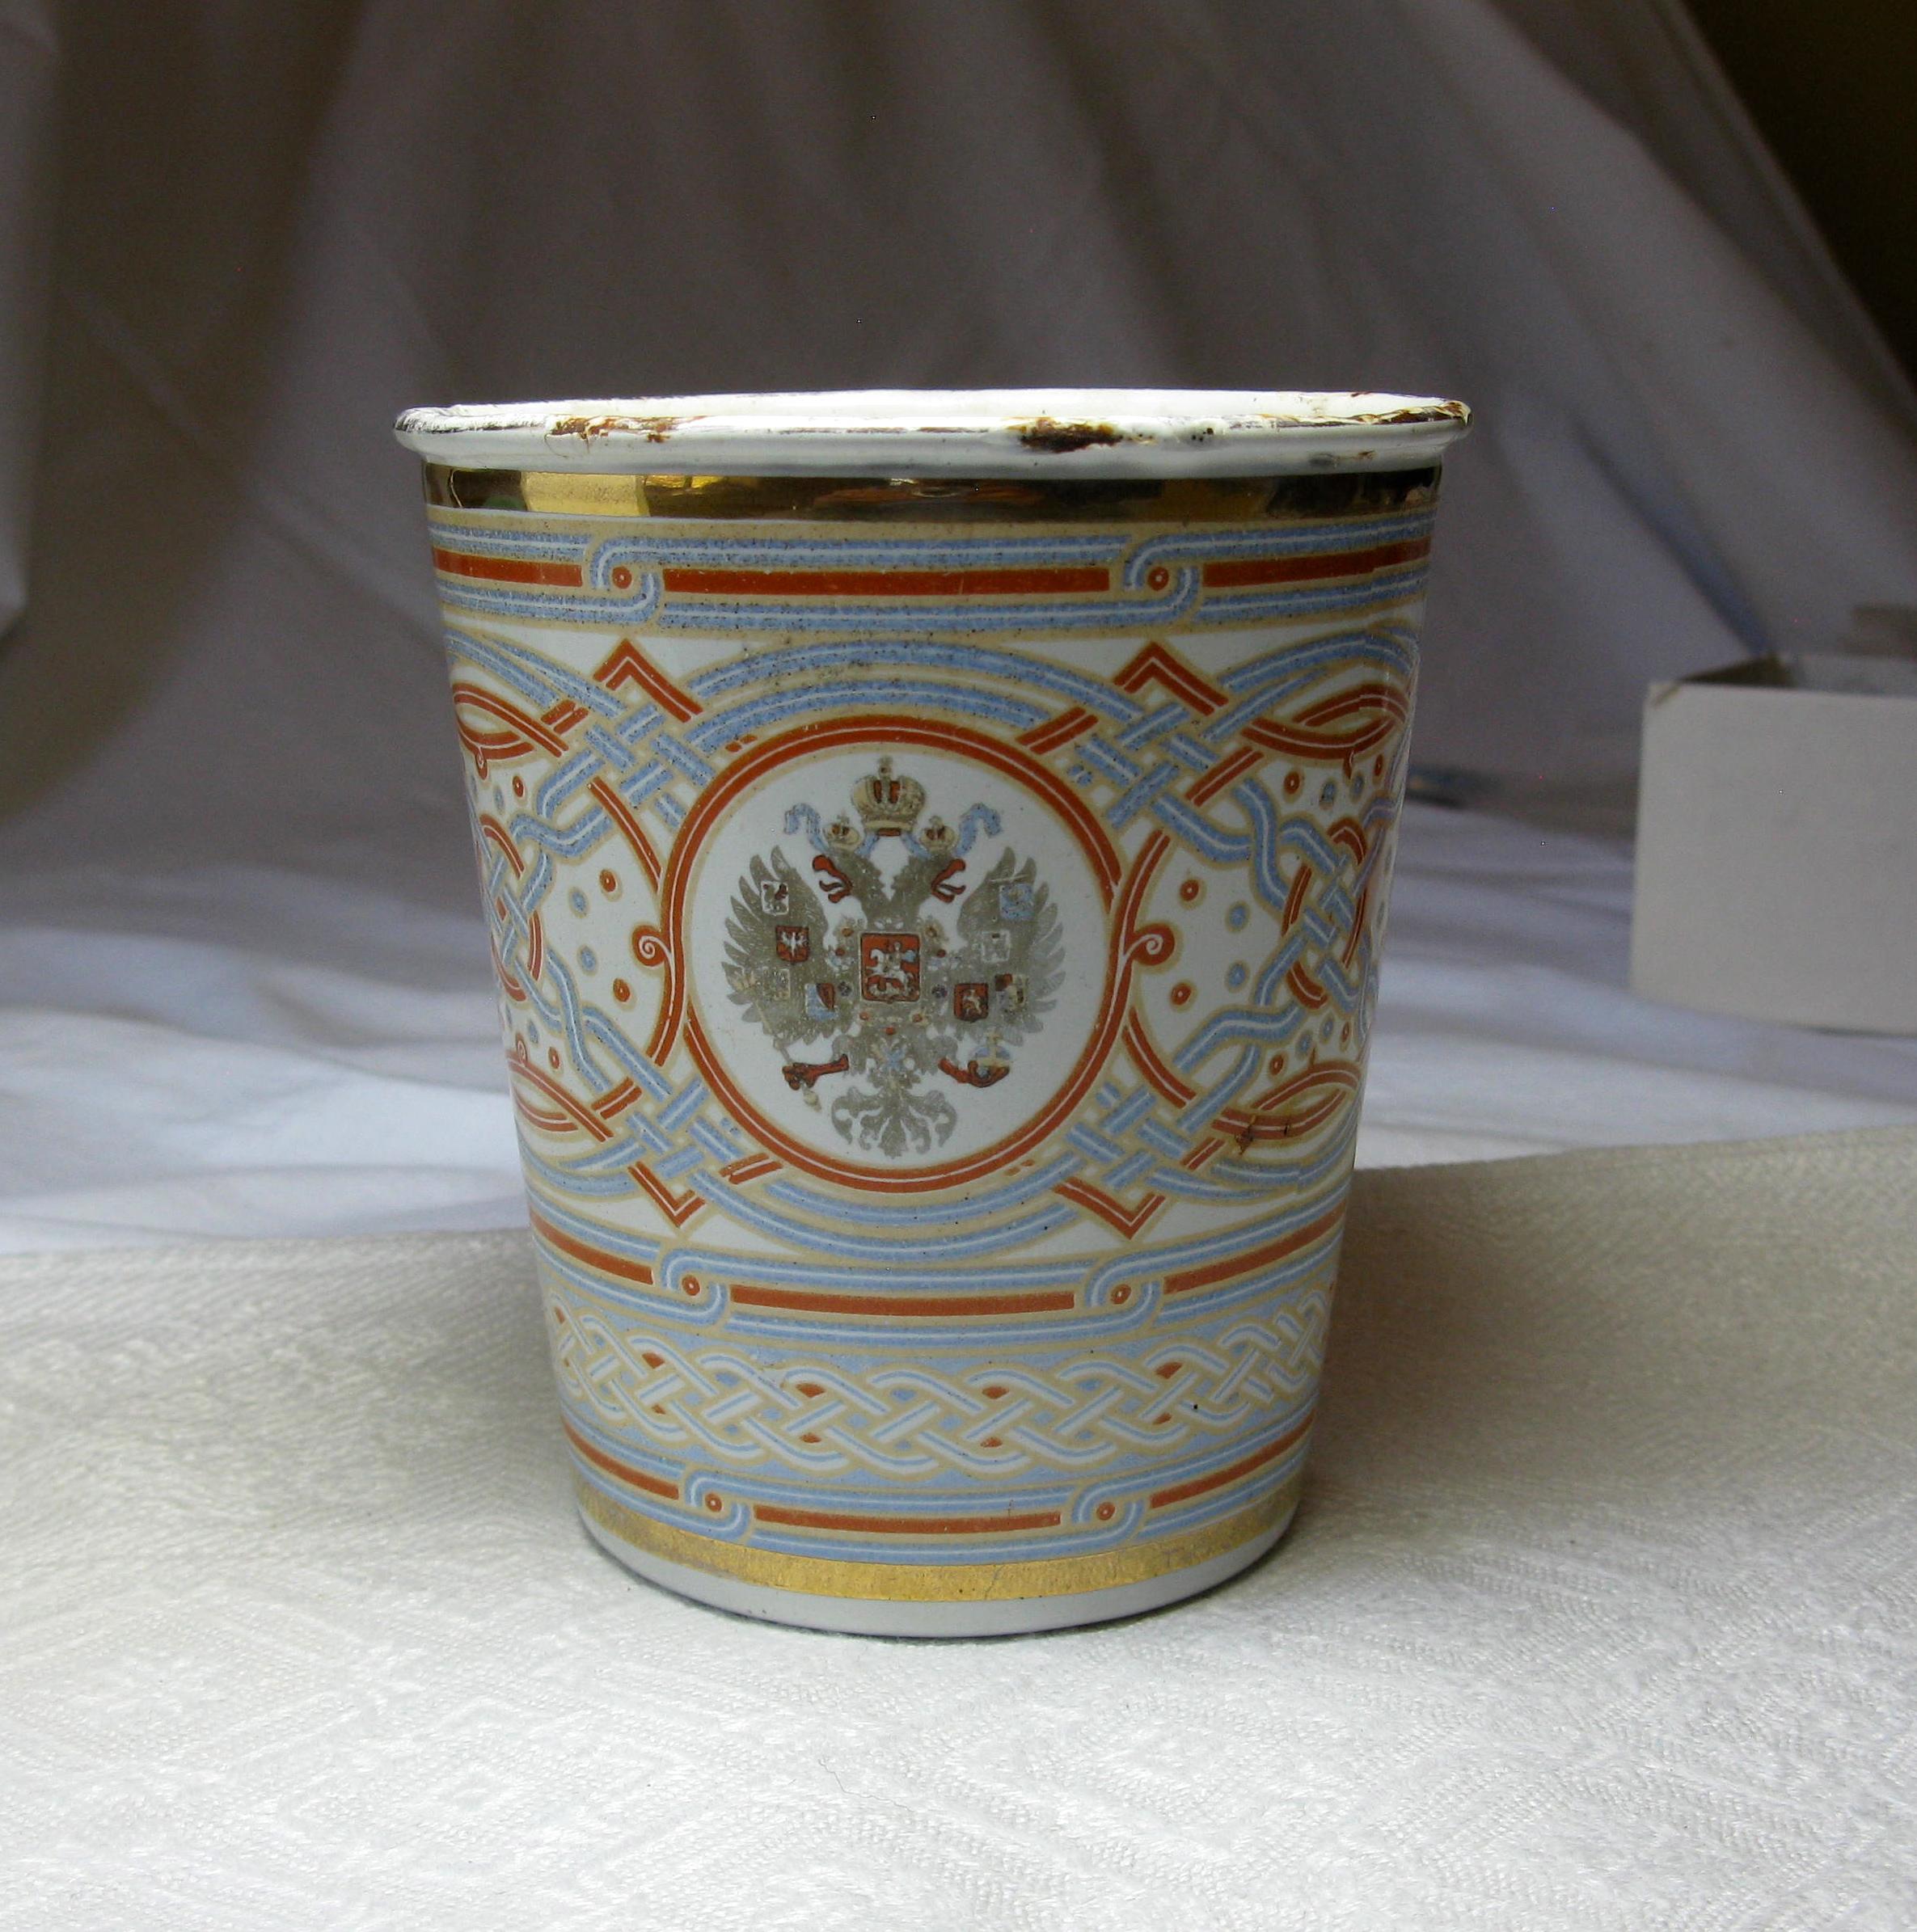 This rare Russian Enamel Coronation Cup was designed for the coronation of Tsar Nicholas II and Tsarina Alexandra Feodorovna in 1896.  It became known as the Khodynka Cup of Sorrows. The cup bears the cyphers of Czar Nicholas and Alexandra